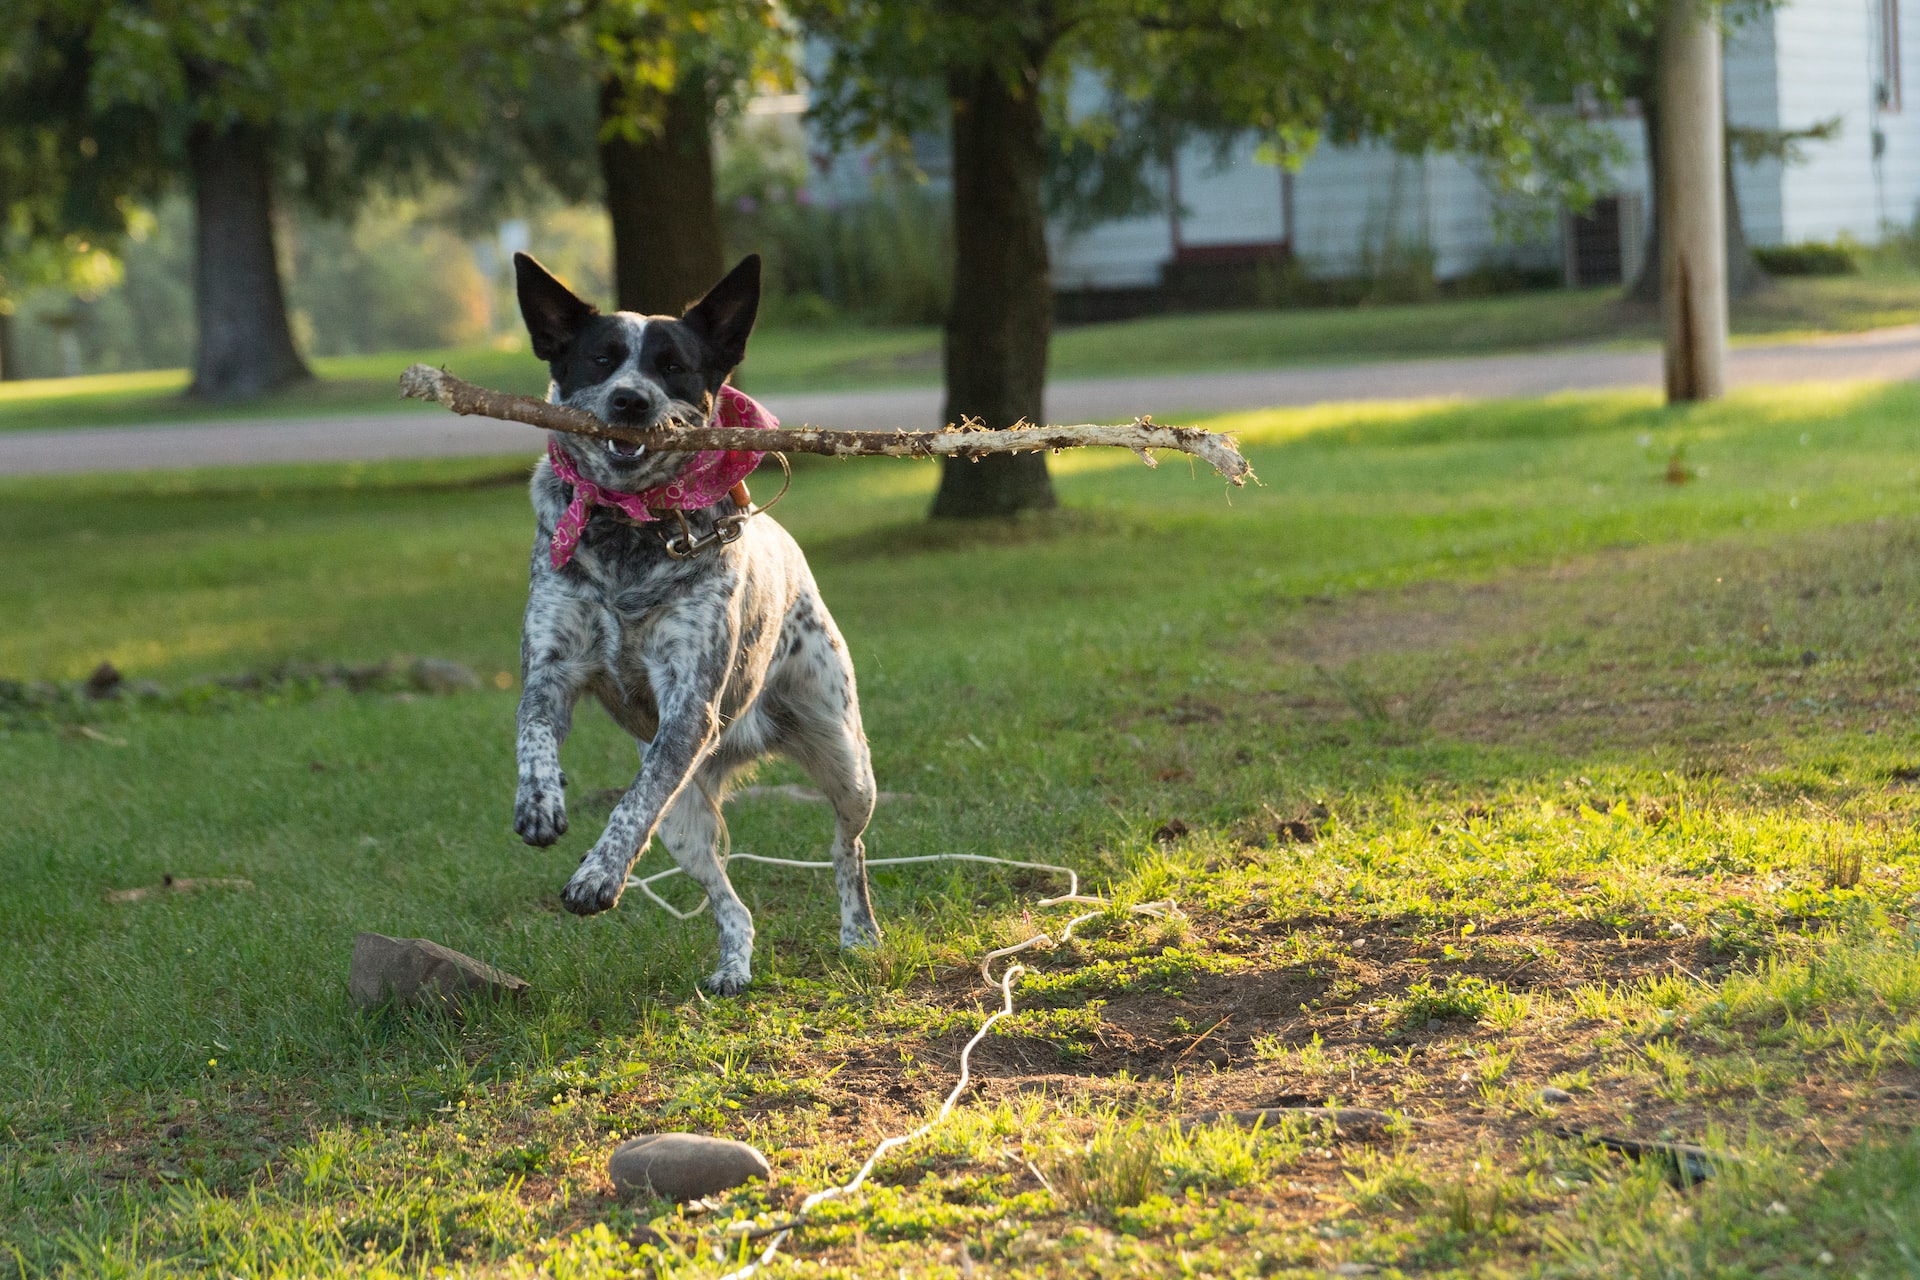 Blue heeler dog wearing a red bandana and running with a stick in his mouth